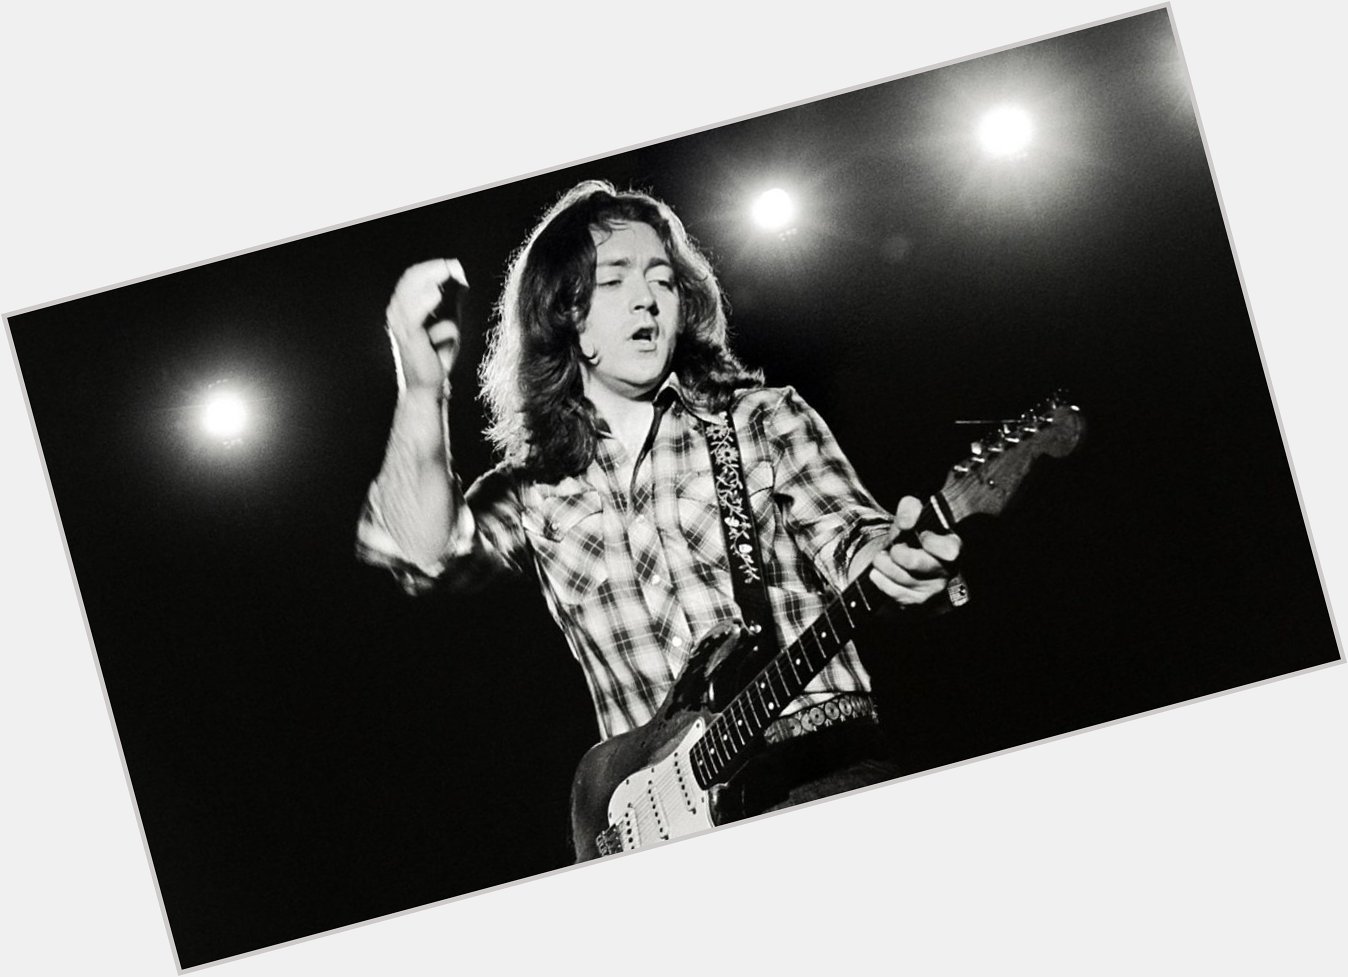 Happy Birthday To This Legend. Rory Gallagher Gone Too Soon. R.I.P 